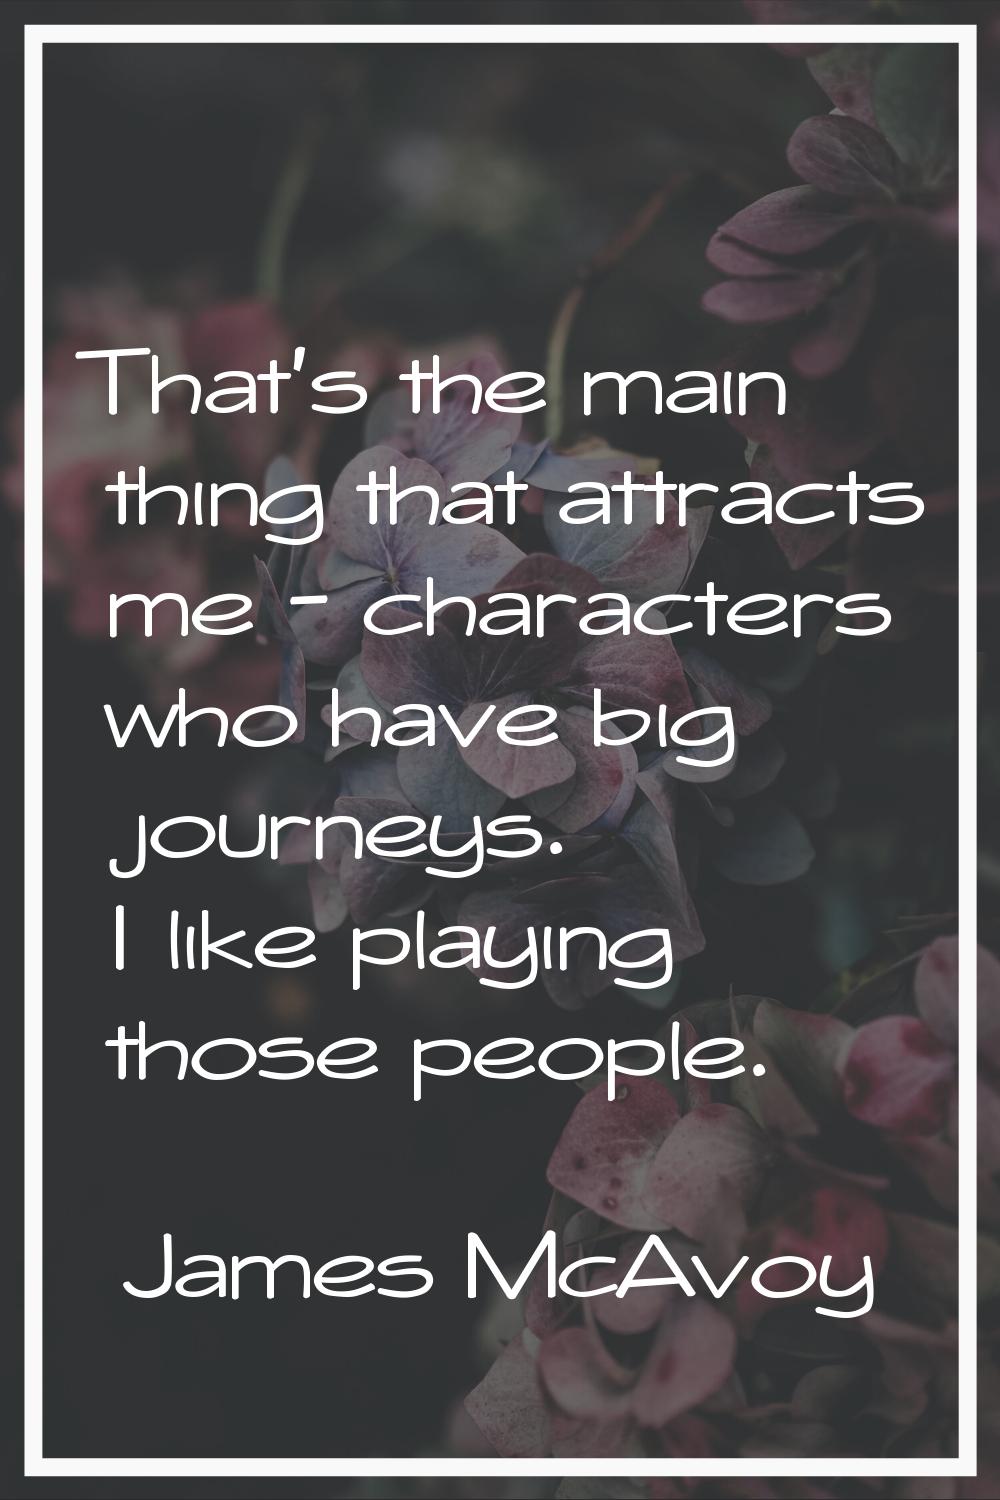 That's the main thing that attracts me - characters who have big journeys. I like playing those peo